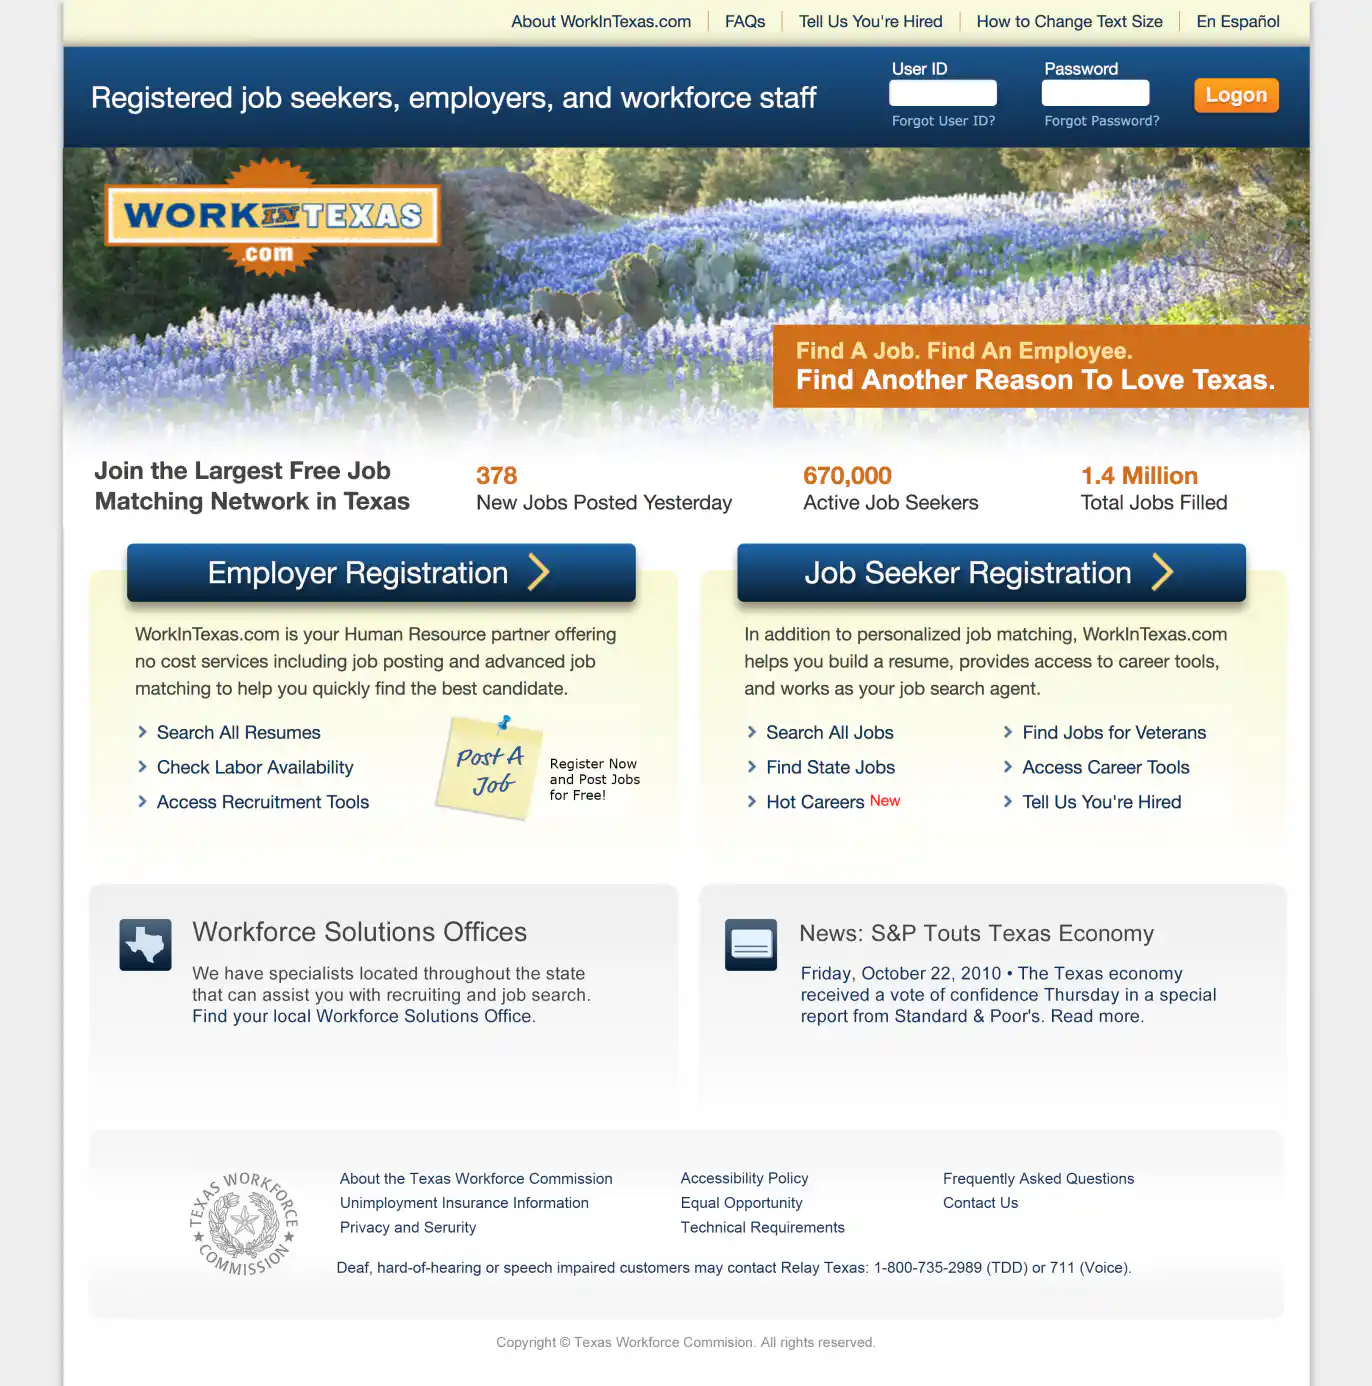 image showing homepage design